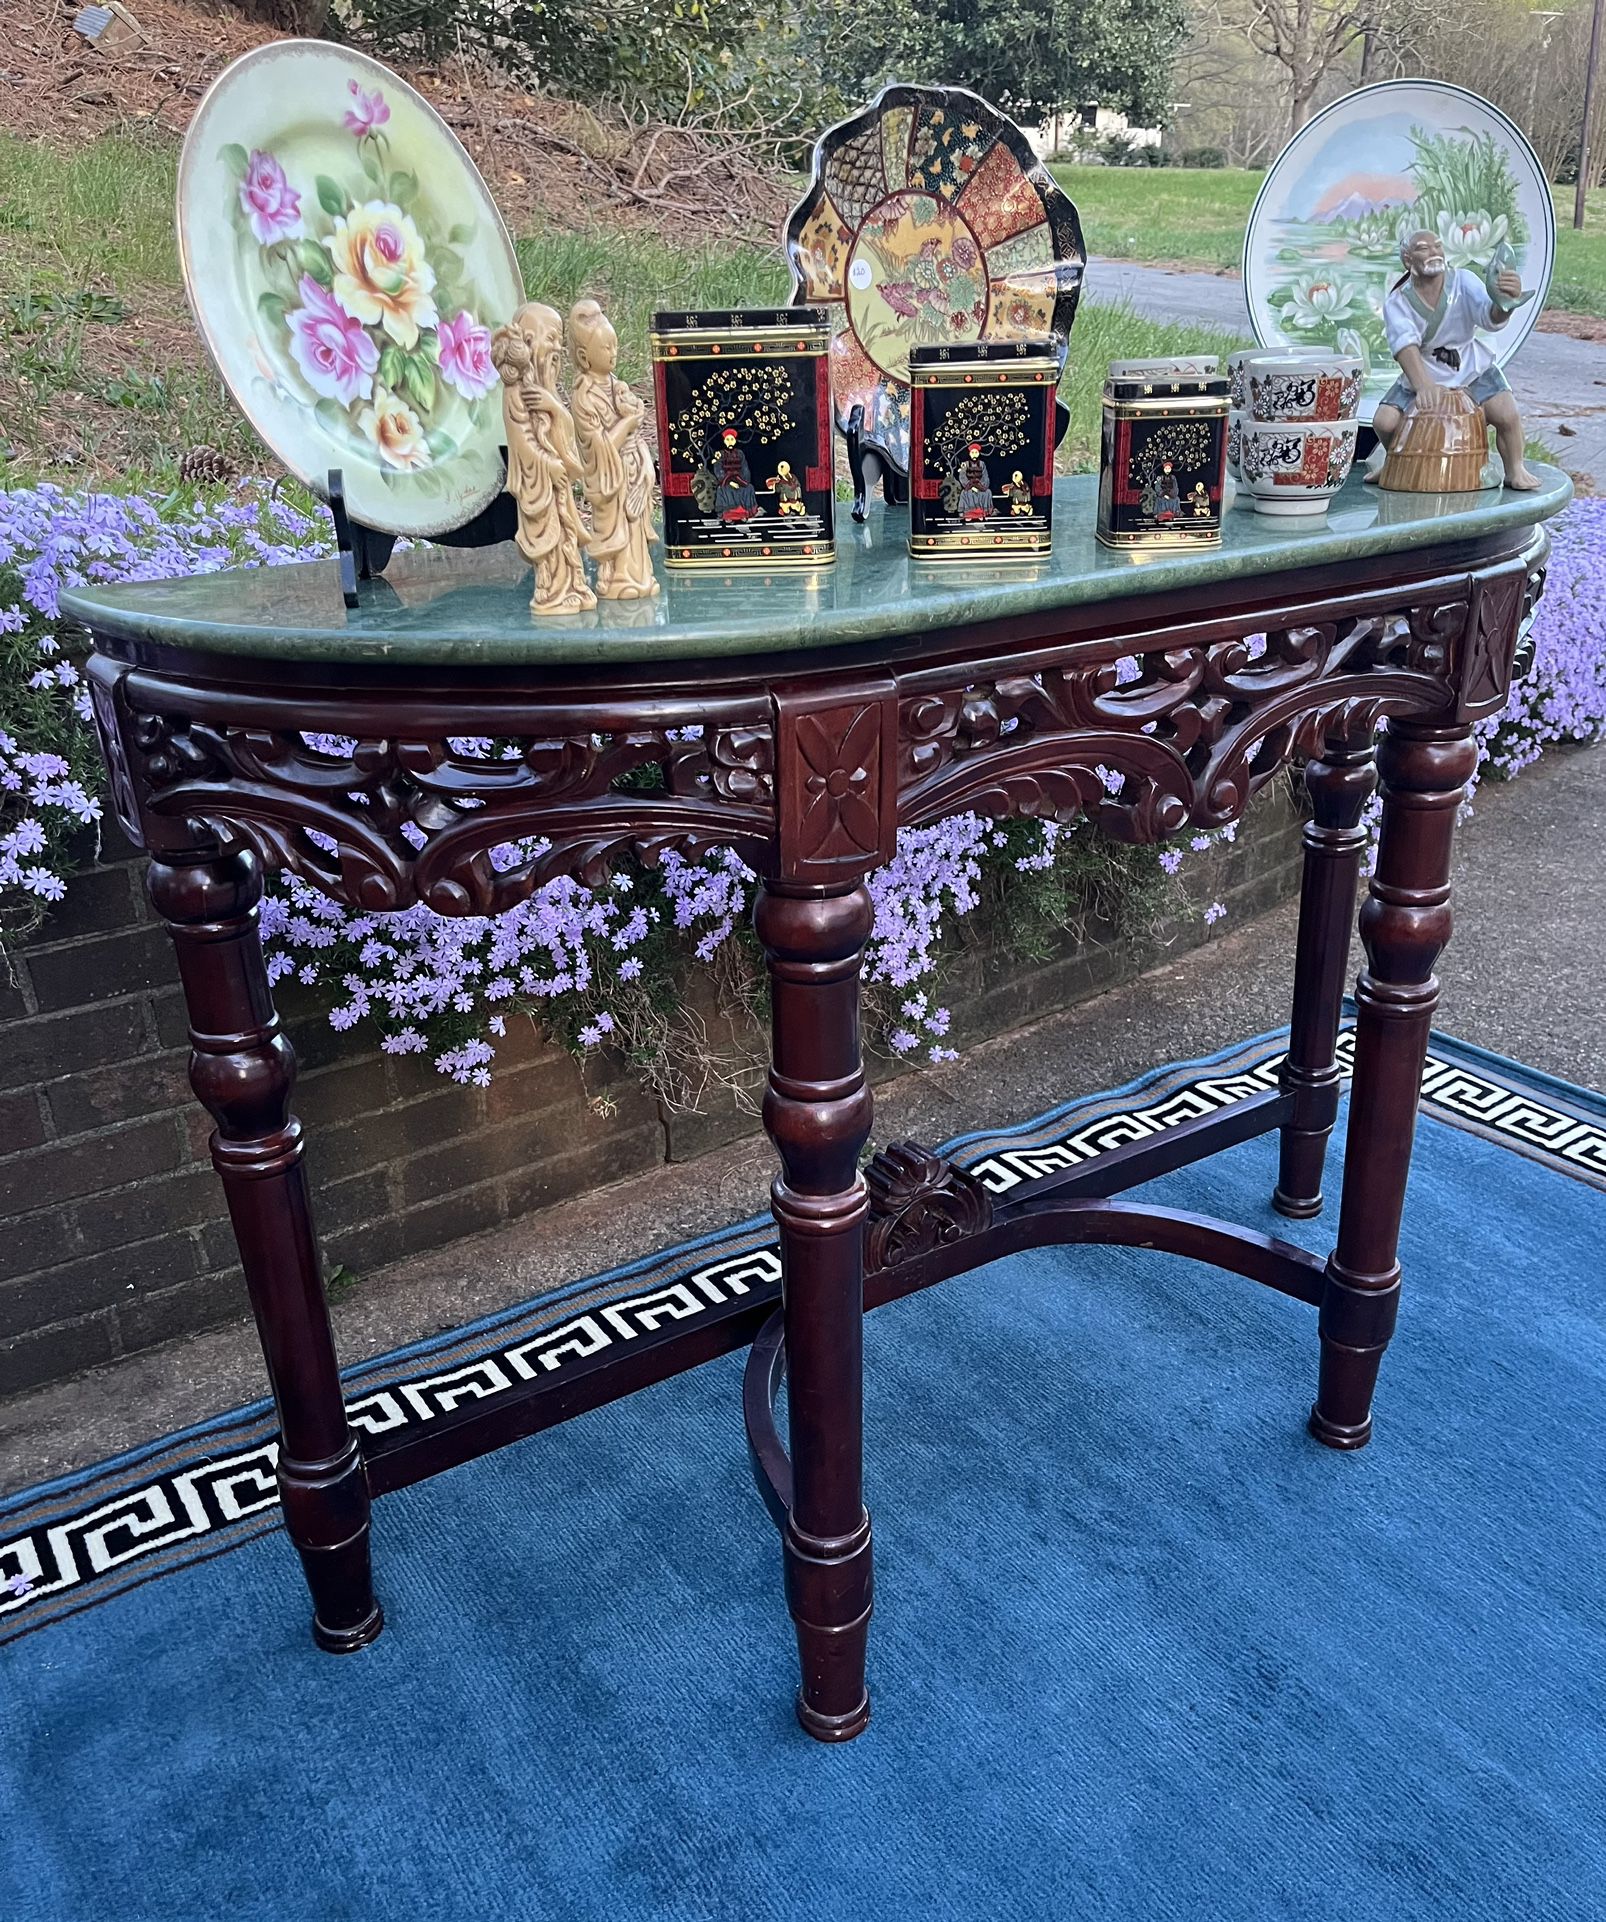 Pan-Asian Carved Rosewood Console/ Foyer Table w/ Marble Top REDUCED to JUST $260!